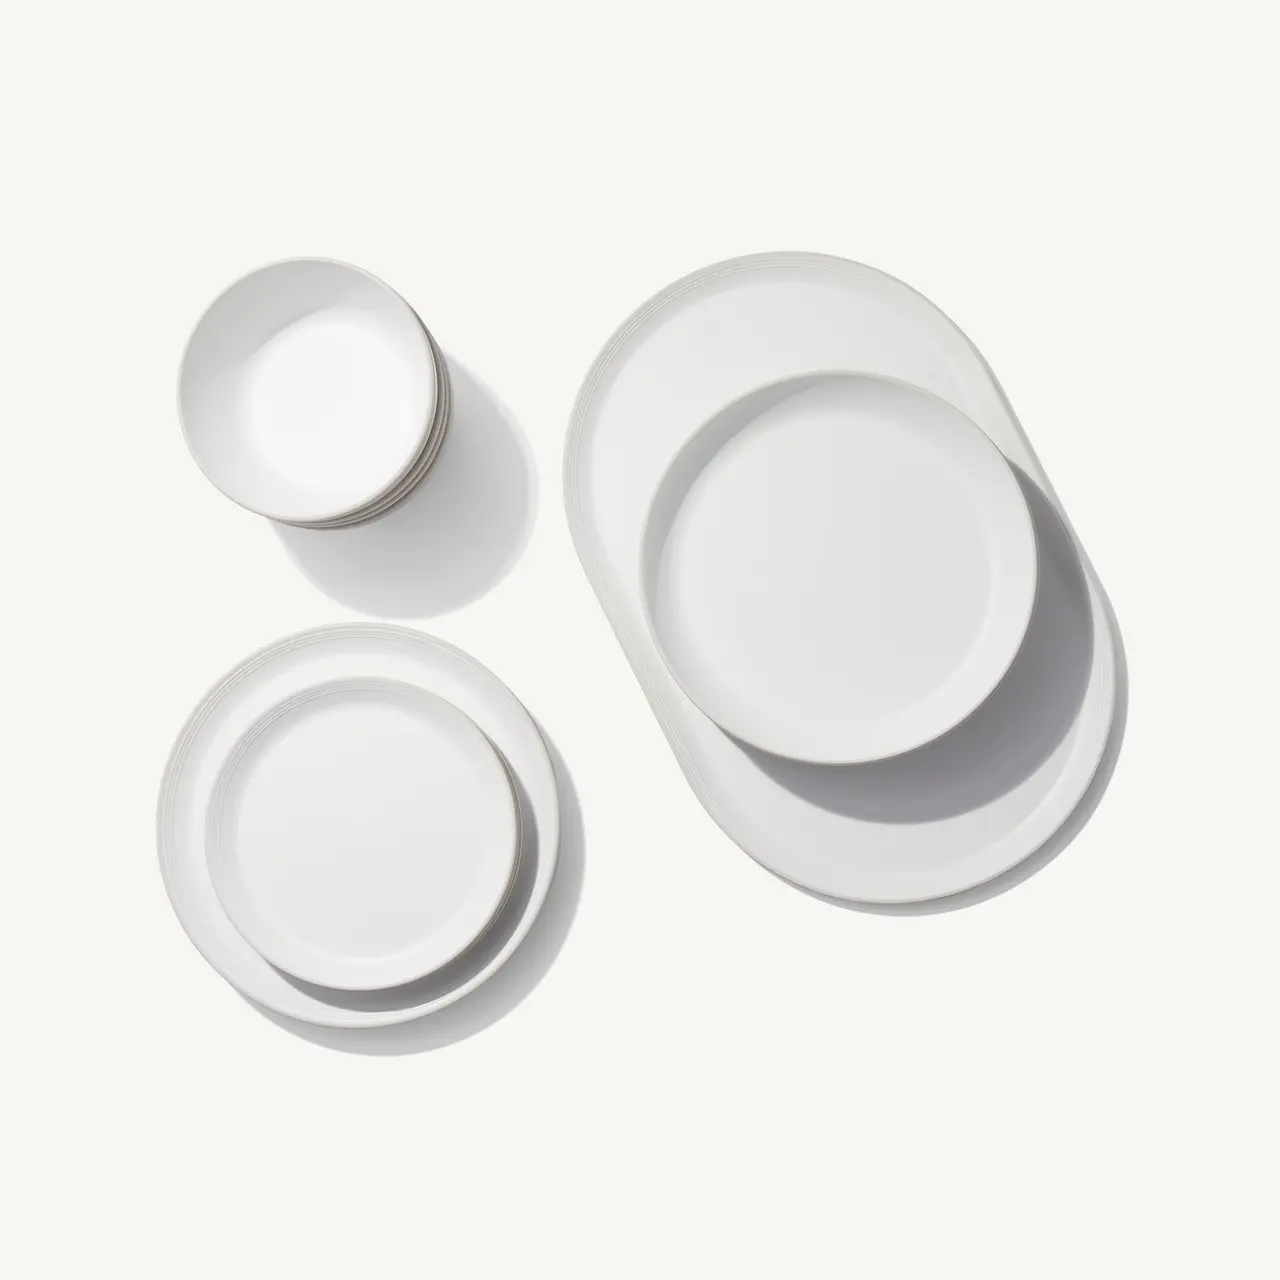 White ceramic dishware, consisting of stacked round plates and an oval platter, is neatly arranged on a light surface casting soft shadows.